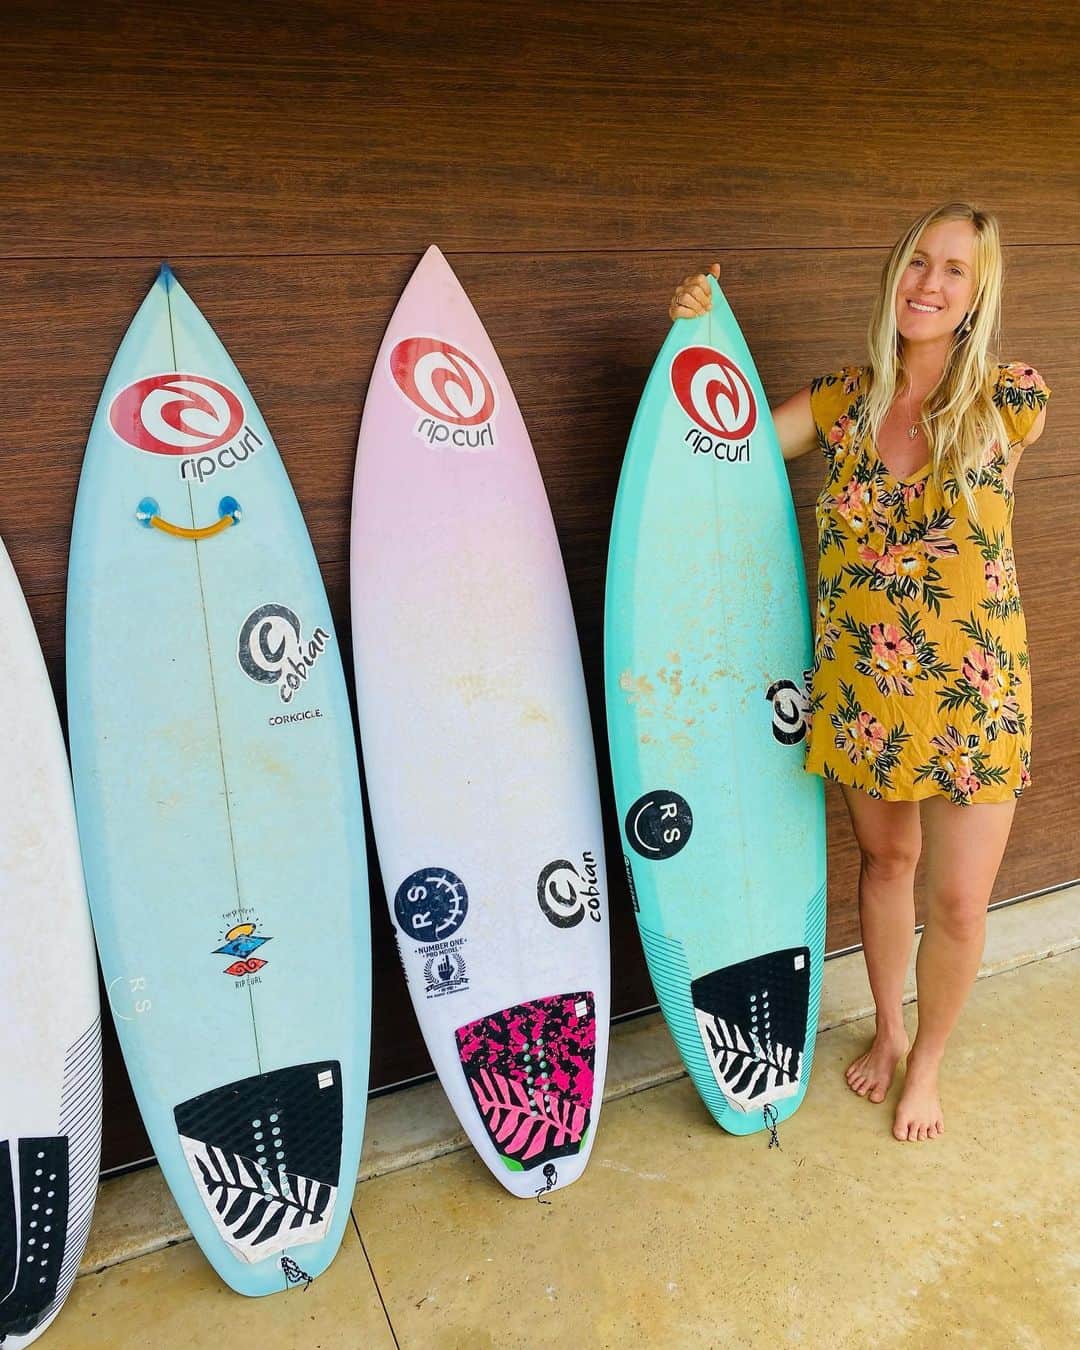 Bethany Hamiltonのインスタグラム：「Super stoked to have joined  the @rssurfco team this year!!! It’s been a year of many transitions and I’m soooo pumped on the boards I’ve been getting shaped by @mgyenes_shapes 🔥🔥🔥 And at this moment in time, I’m literally counting down the days, maybe 6-8weeks or so, till I can get back on my board and surf!!! Excited to keep the momentum going and have fun  in the ocean!  But first... have this baby, enjoy baby and then bring baby to the beach haha 🤰🏼👼🏽☀️🏄🏼‍♀️」